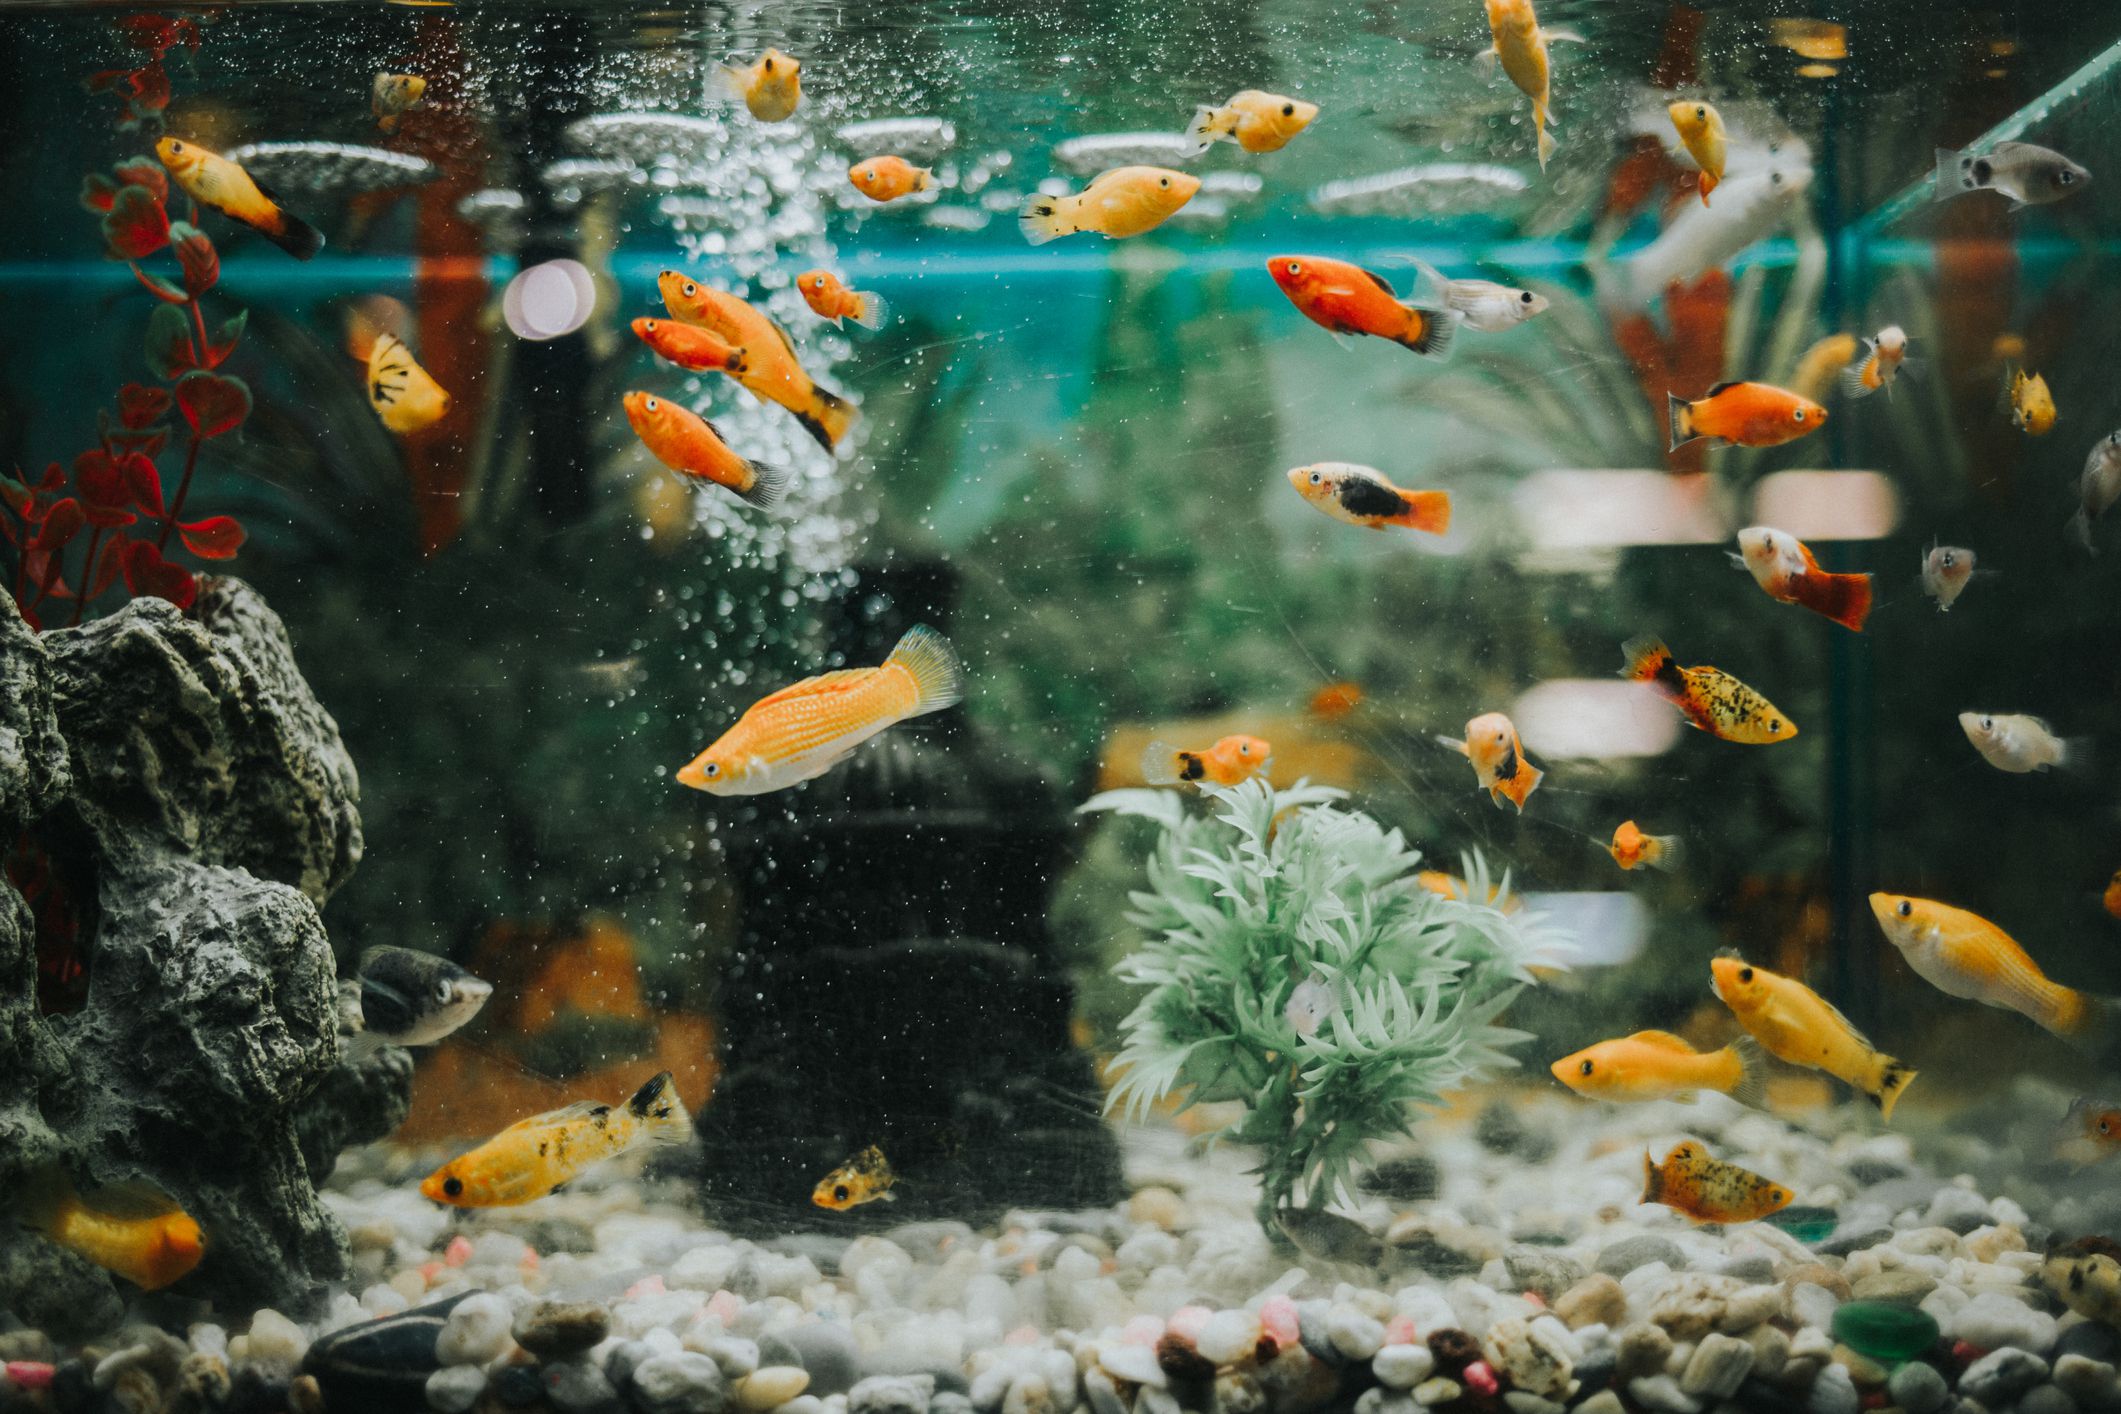 How to Care for your Pet Fish?